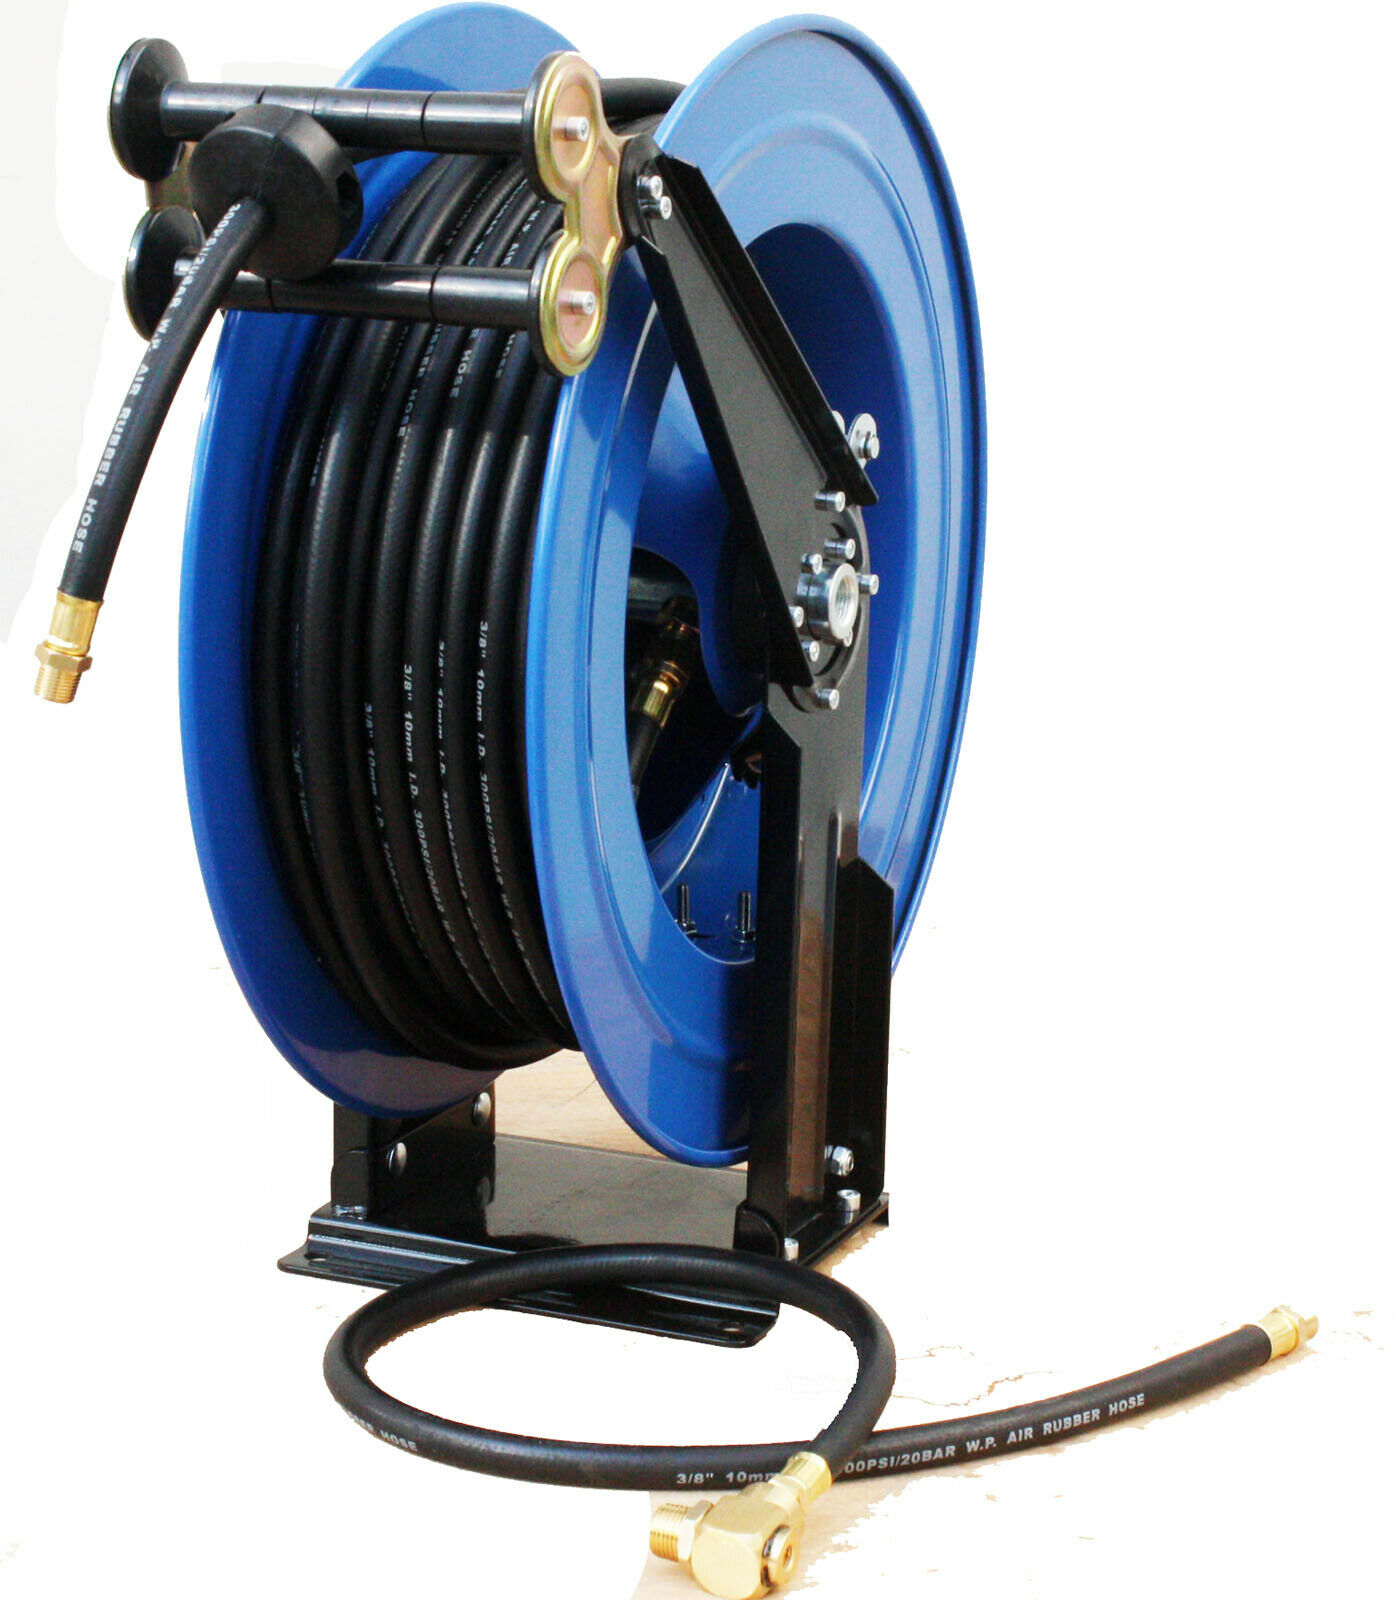 https://econosuperstore.com/wp-content/uploads/imported/3/Auto-Retractable-100-Air-Hose-Reel-100ft-Rubber-Hose-300psi-Ceiling-Wall-Mount-353578067763.jpg